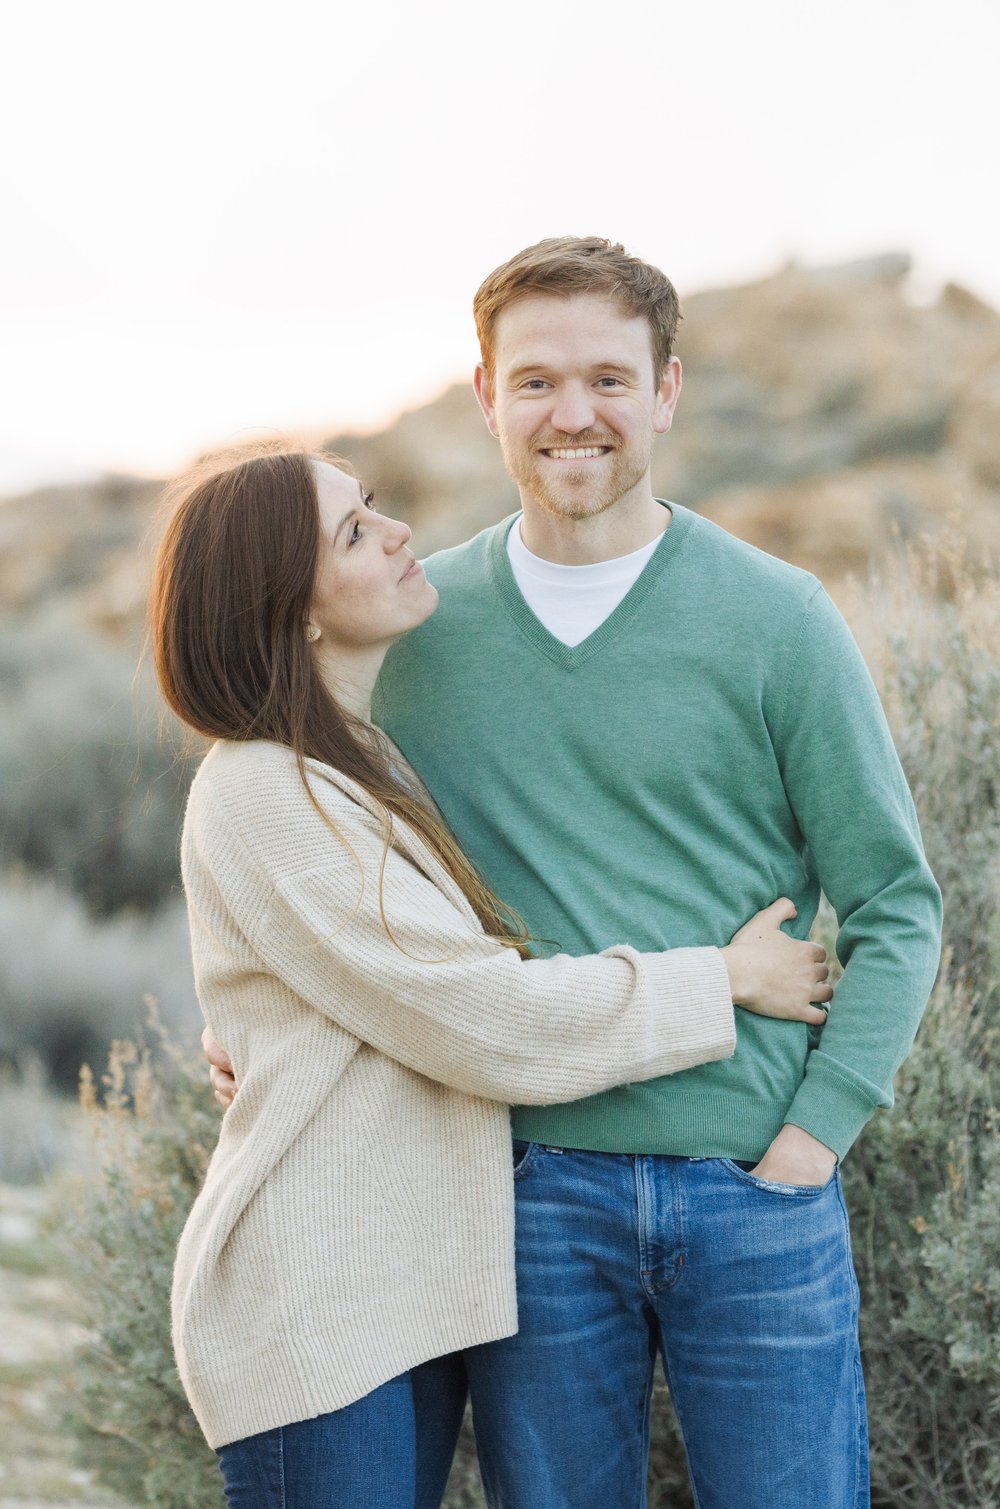  A woman looks lovingly up at her husband-to-be during sunset in Utah by Savanna Richardson Photography. green sweater sweaters for pictures sunset #SavannaRichardsonPhotography #SavannaRichardsonEngagements #UtahEngagements #AntelopeIsland #Springen